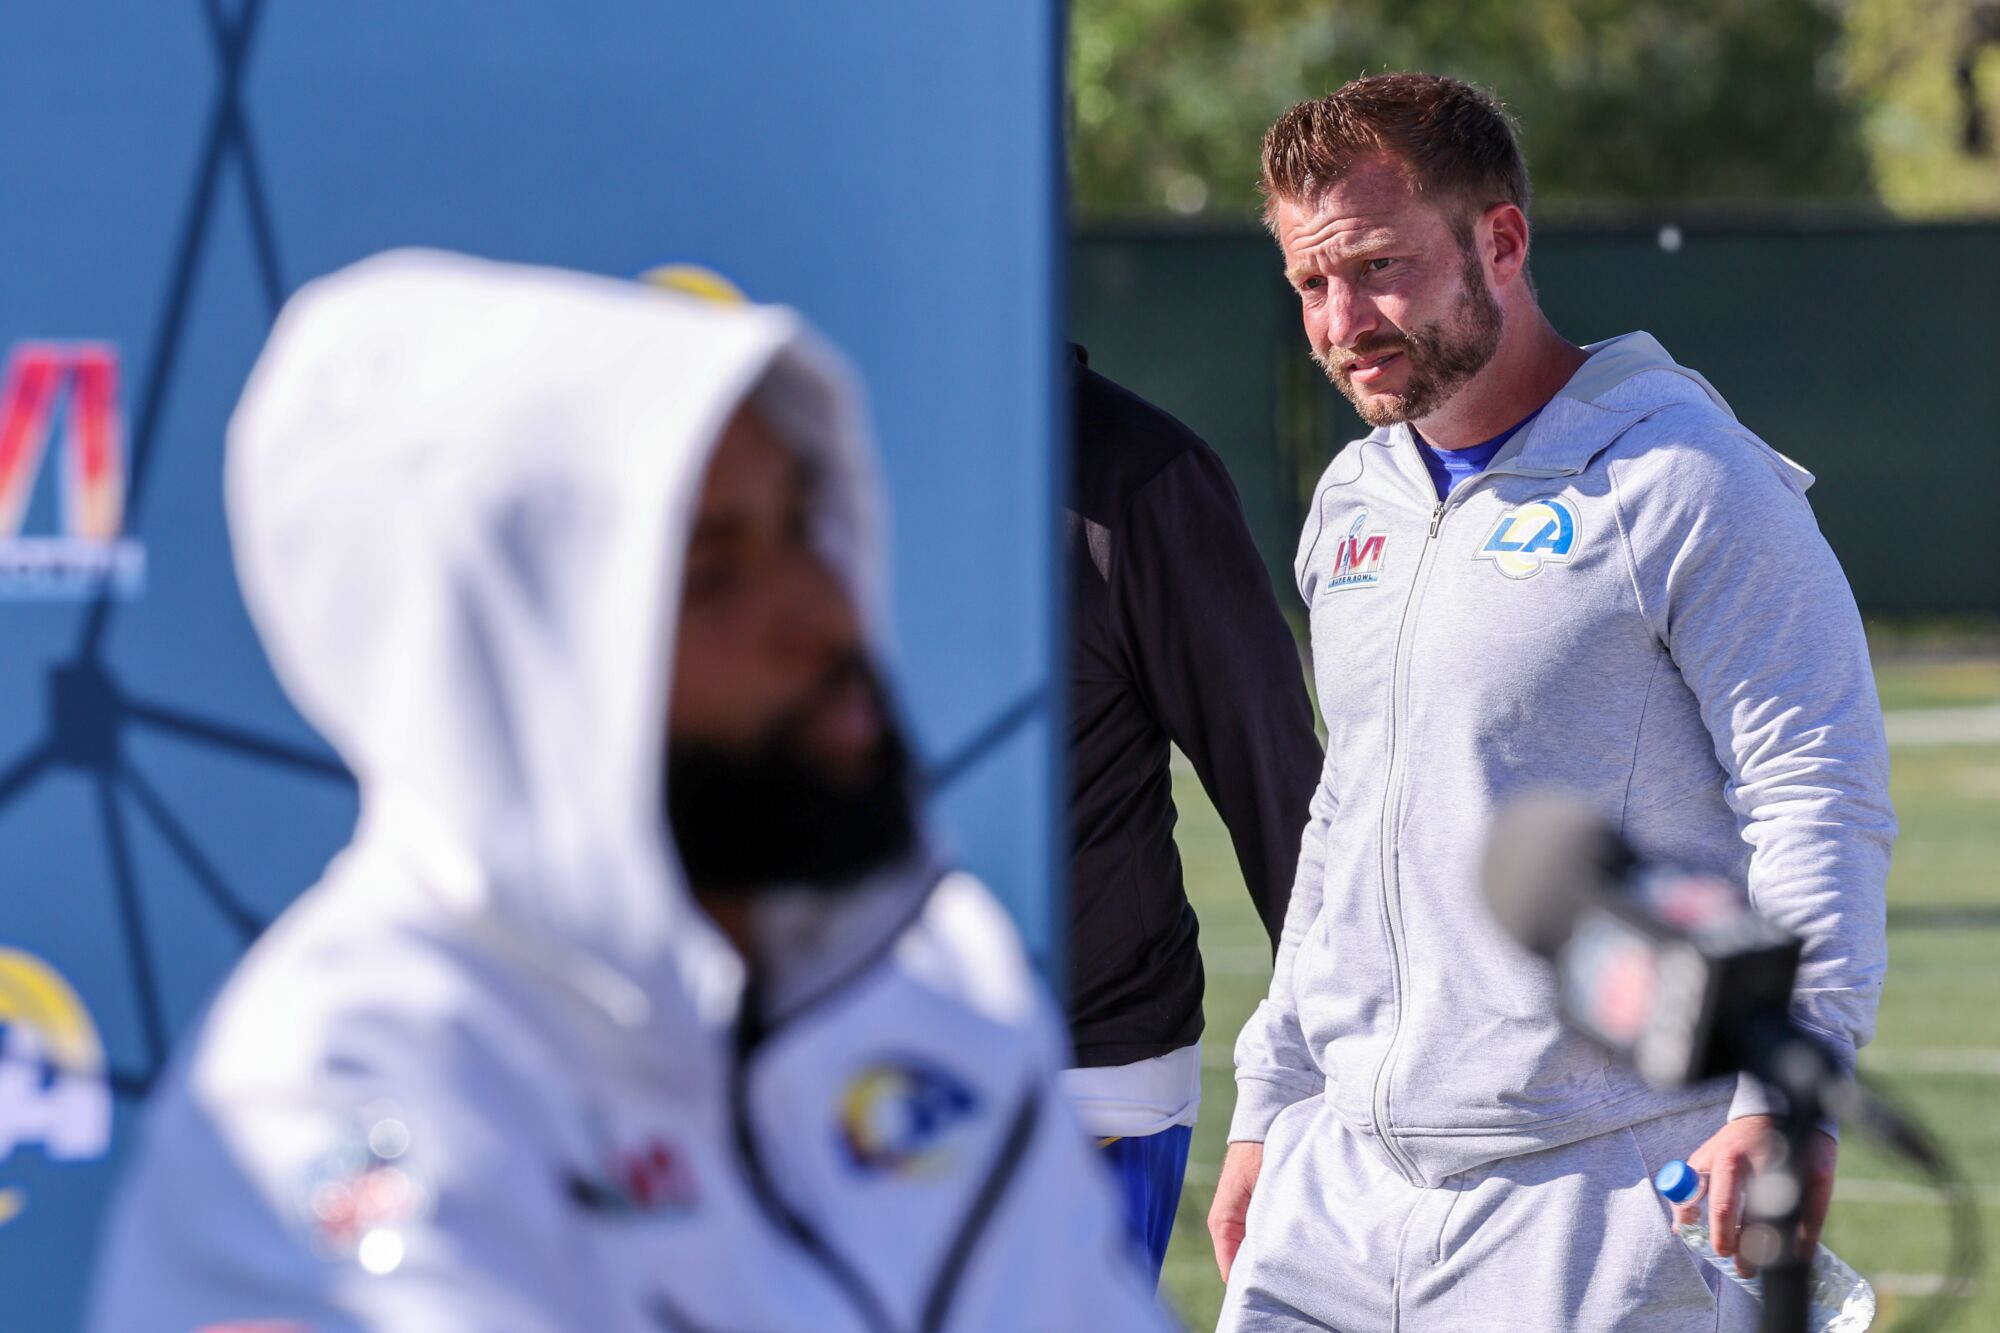 Rams head coach Sean McVay, right, walks past receiver Odell Beckham Jr. during Super Bowl media day in Thousand Oaks.